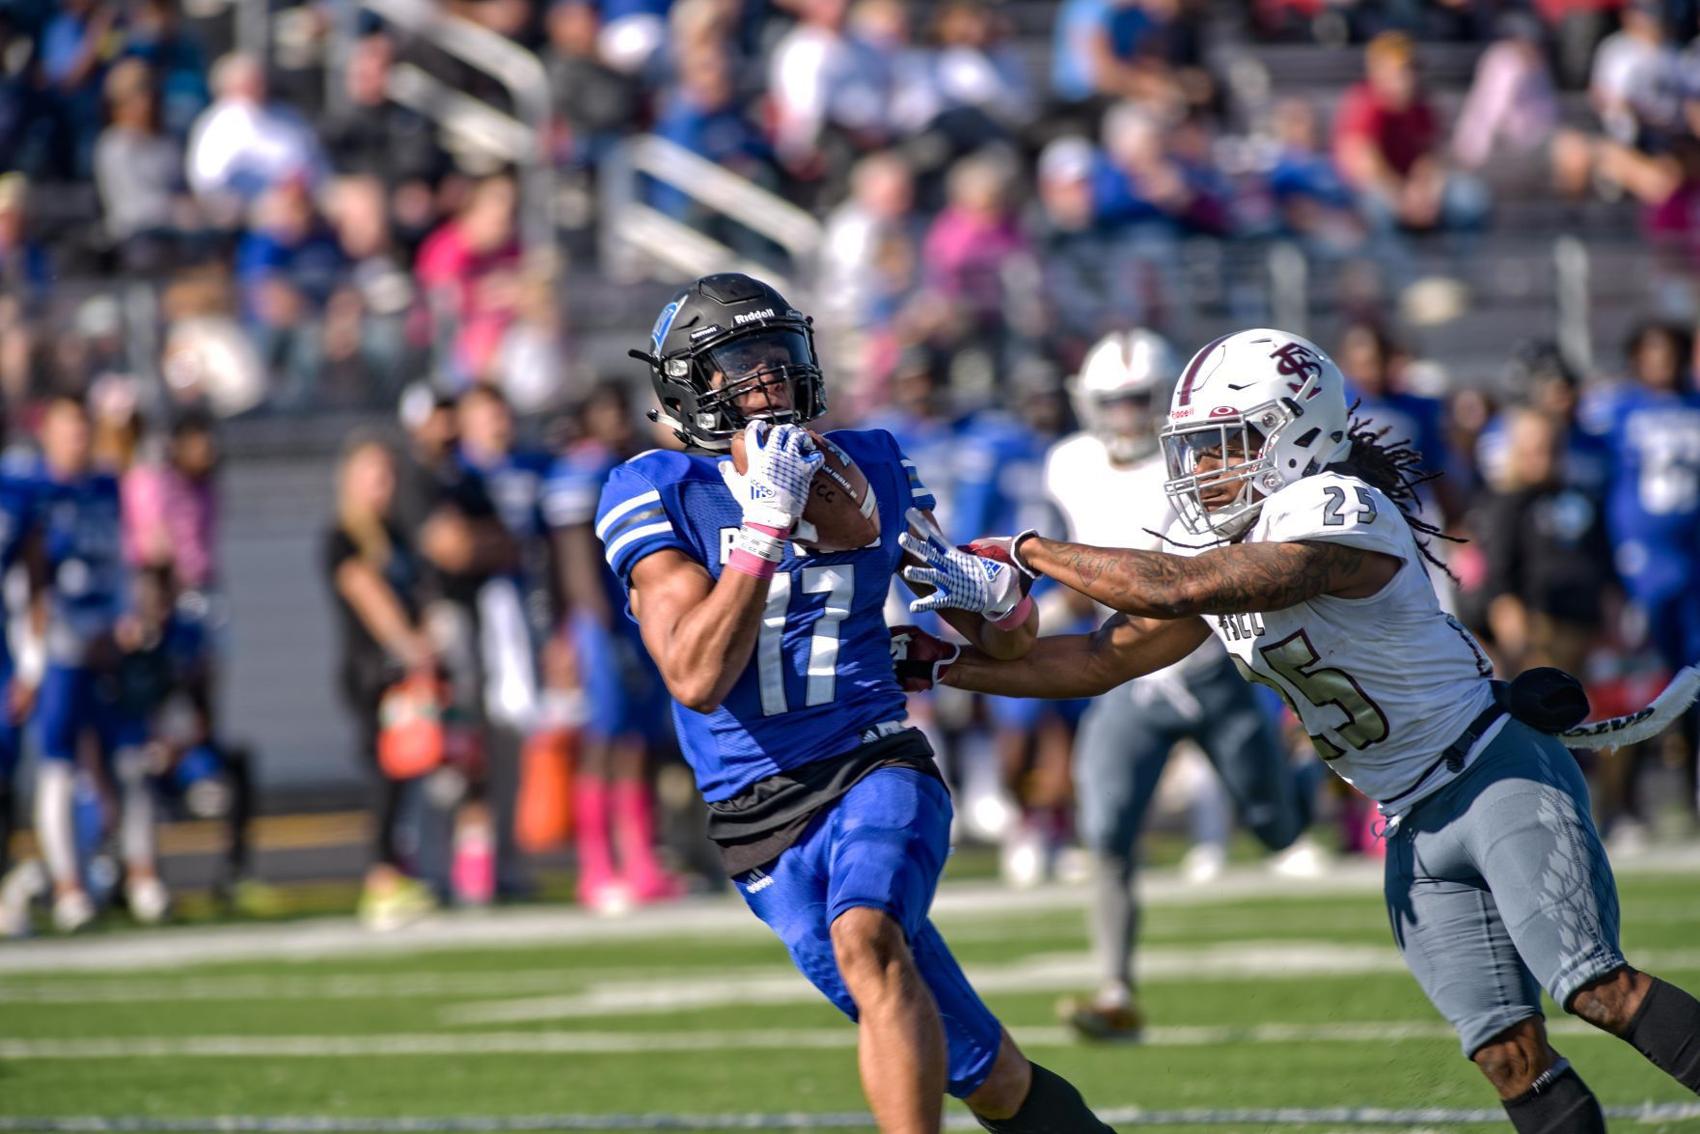 After Fort Scott win, No. 3 Reivers look to clean up mistakes with ranked opponent looming